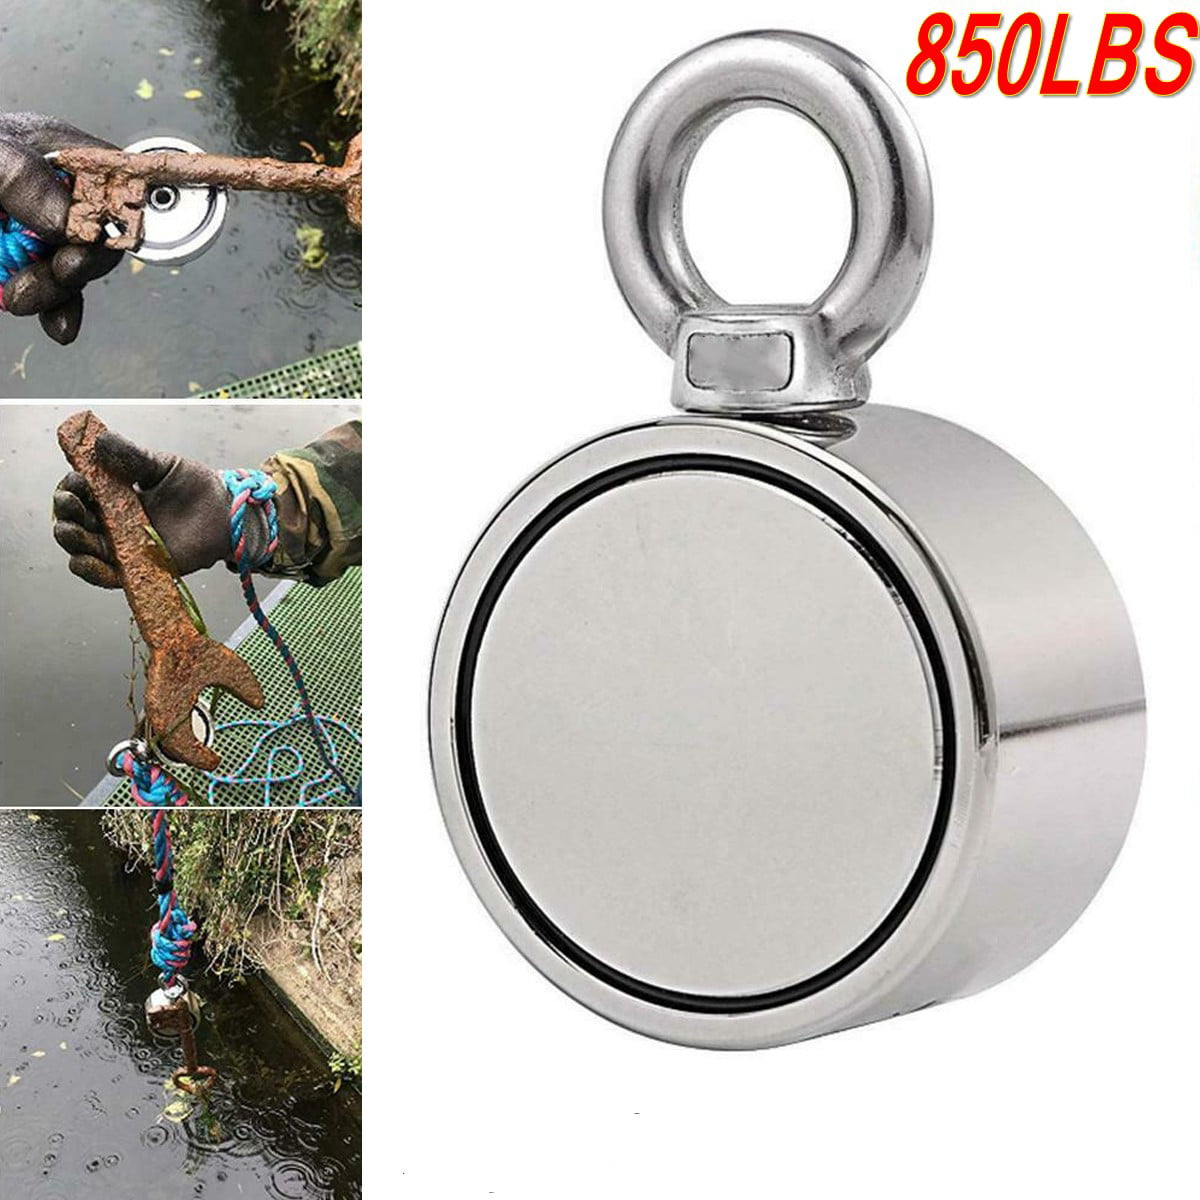 150Kg 30M Nylon Rope Pulling Force Strong Neodymium Magnet for Salvage Powerful Magnets Fishing with 98Ft Carabiner and Hand Gloves 330Lbs Fishing and Retrieving 